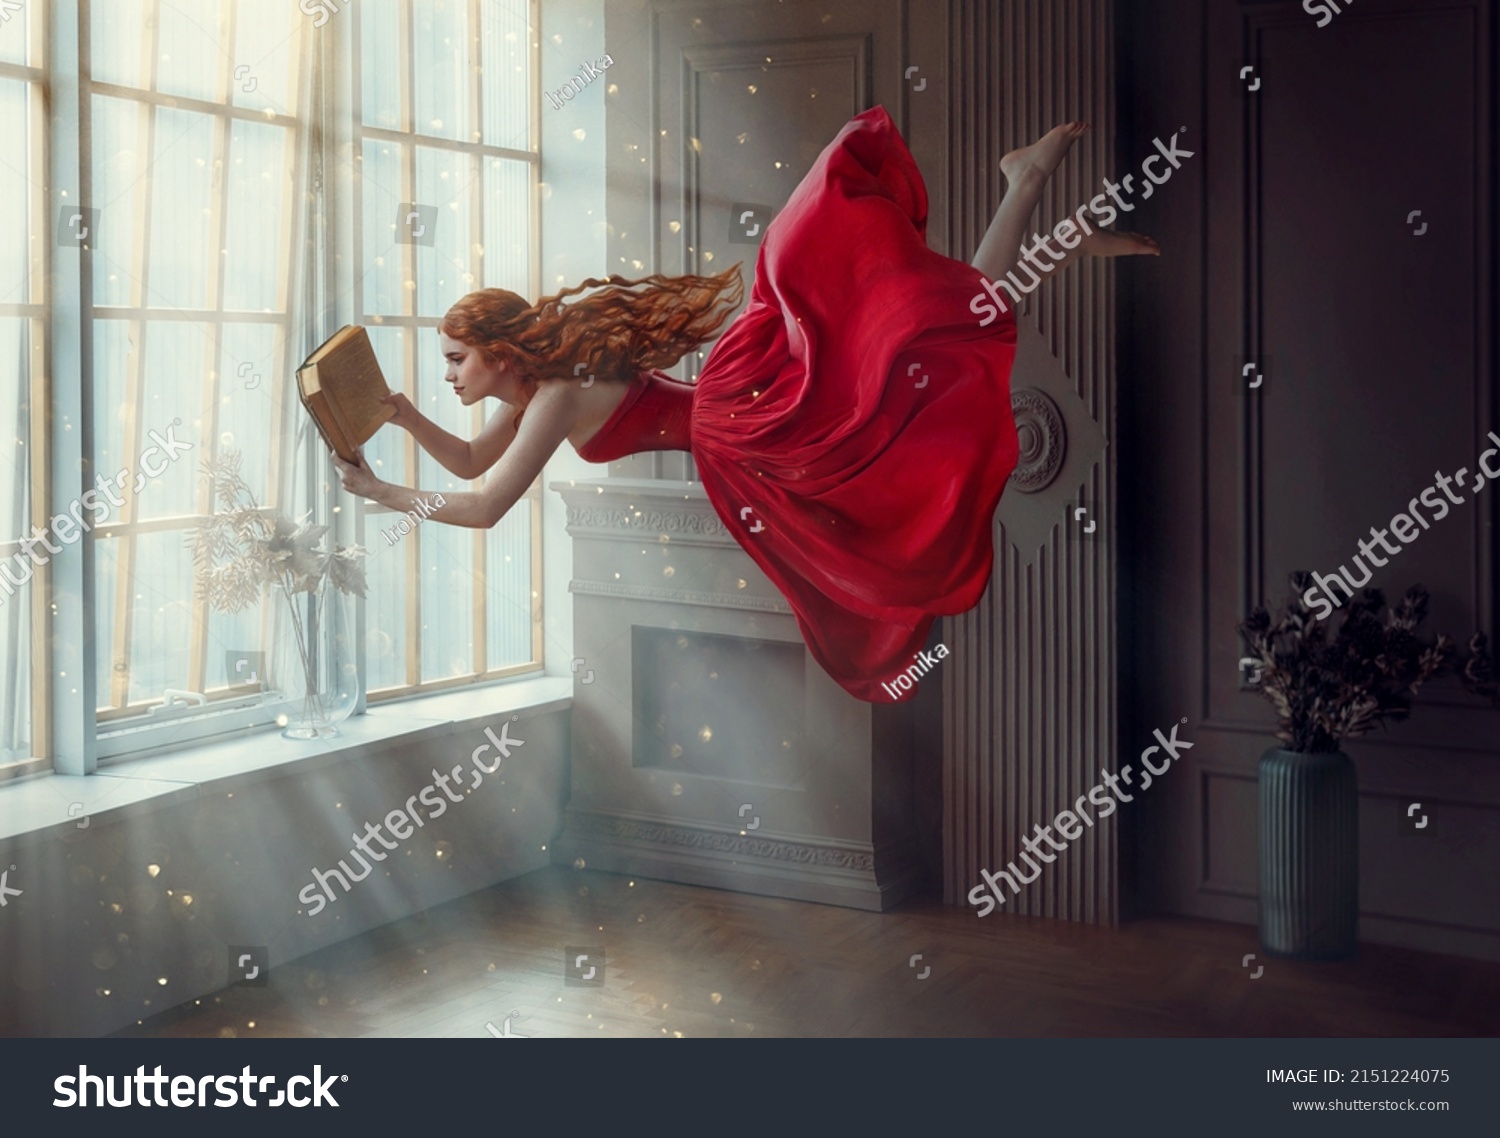 Fantasy redhead woman soars floats flies in air. Art photo levitation. Girl fairy princess reads magic book, divine light from window. Red midi dress, lon hair flutters in wind. Room classic interior #2151224075